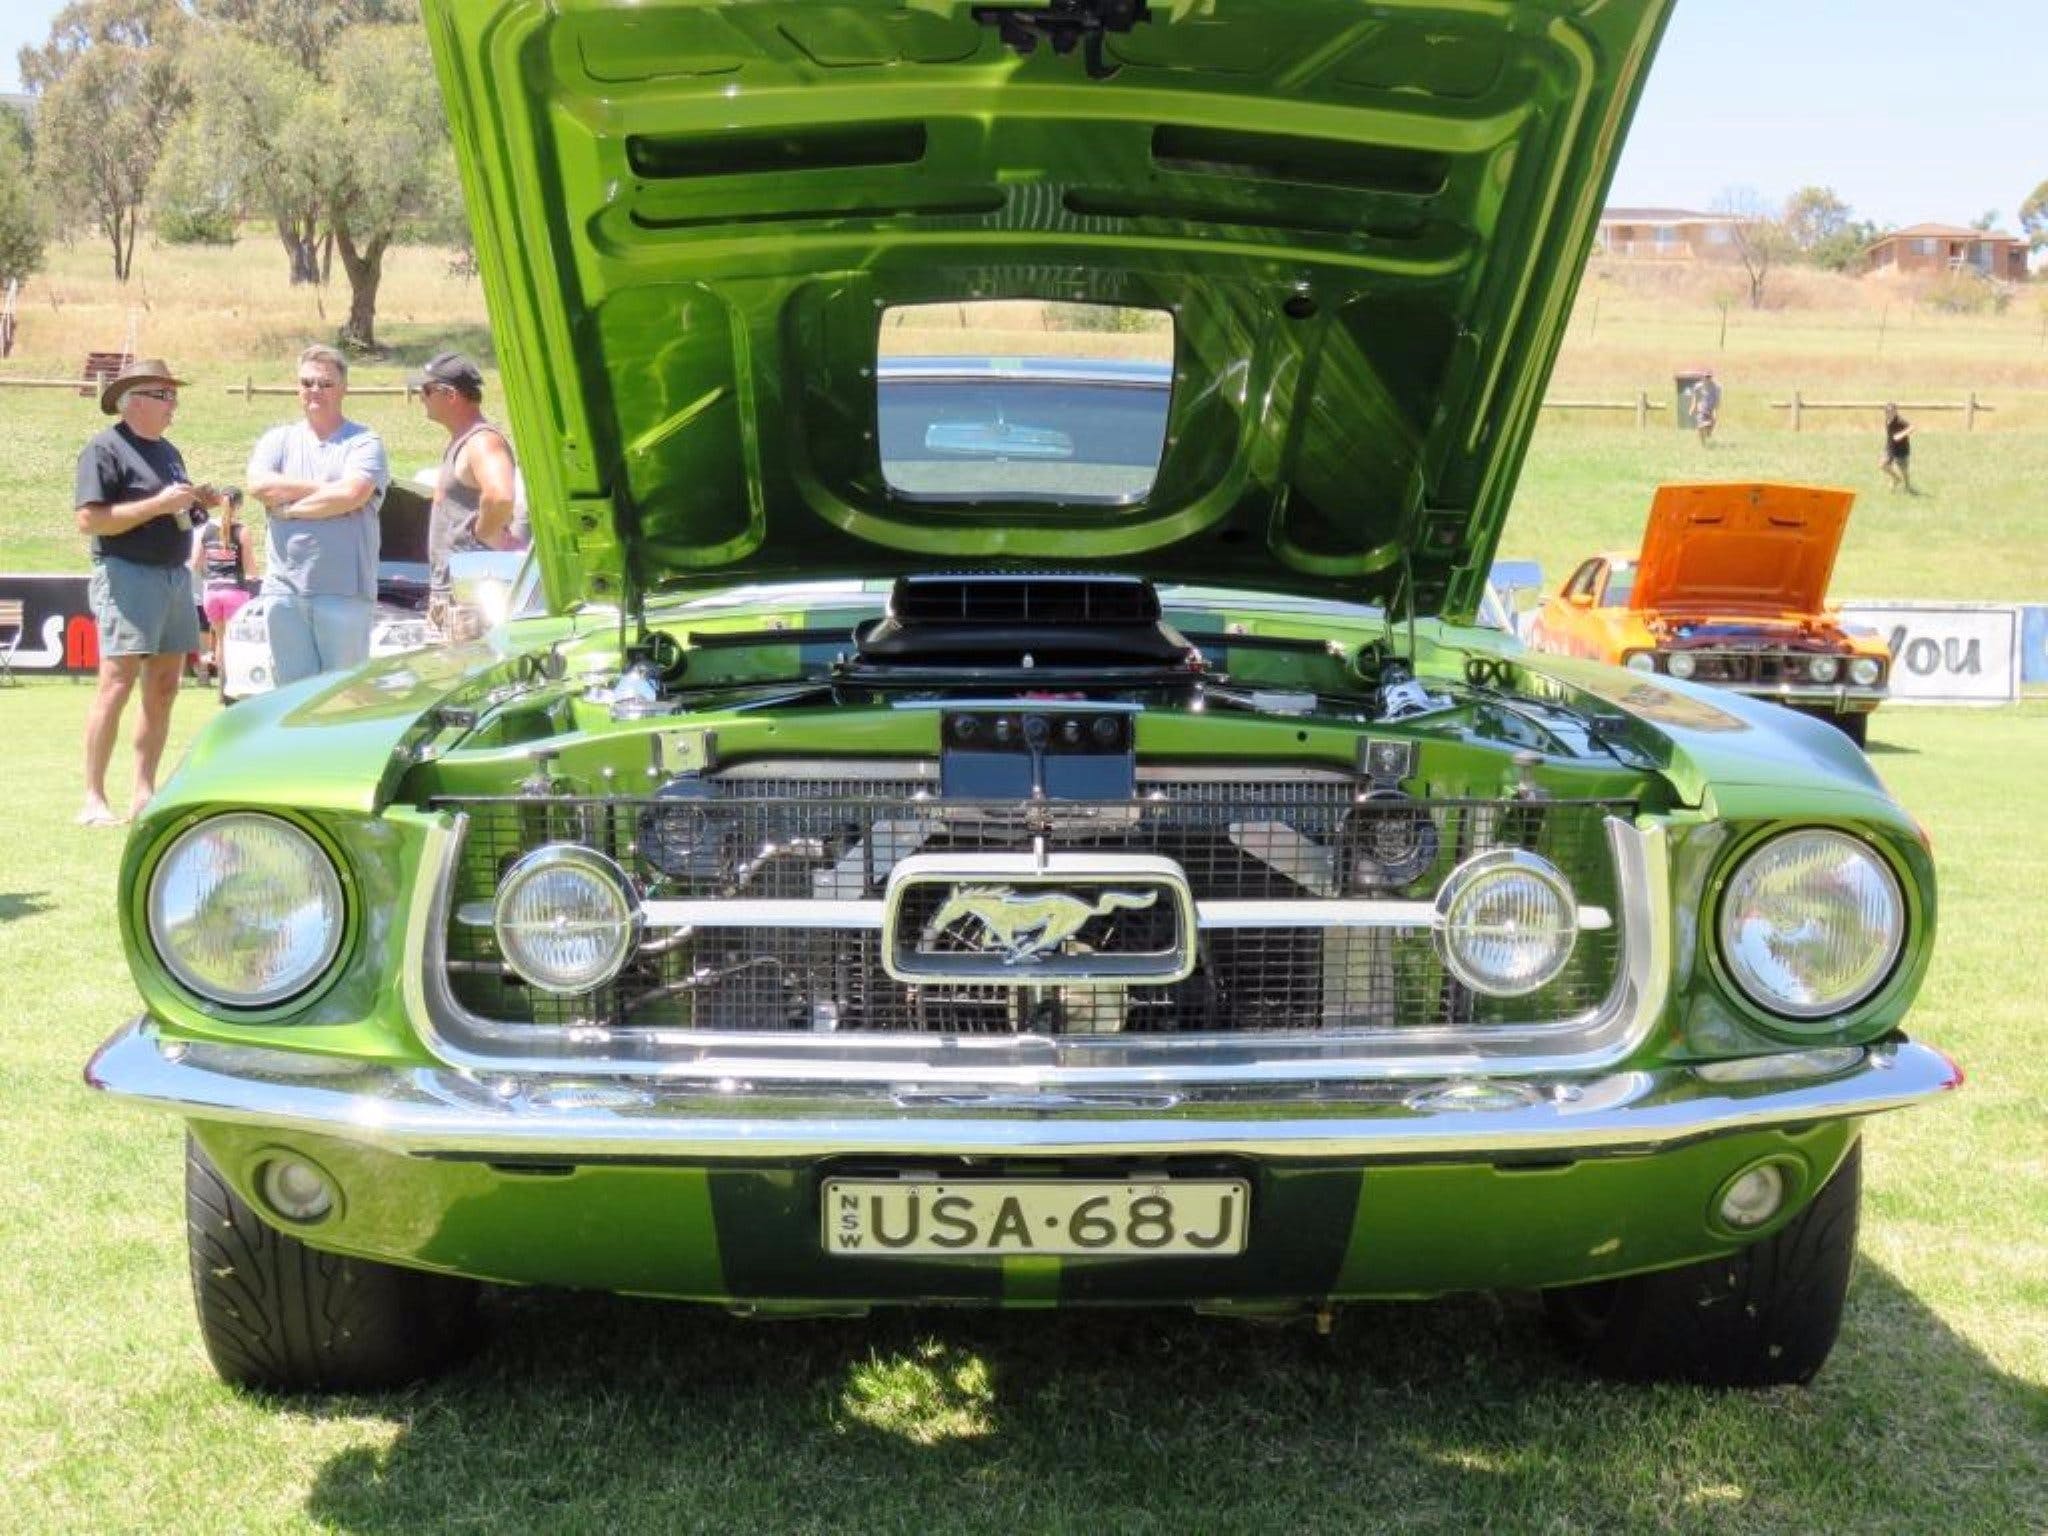 Central West Car Club Charity Show and Shine - Tourism Bookings WA